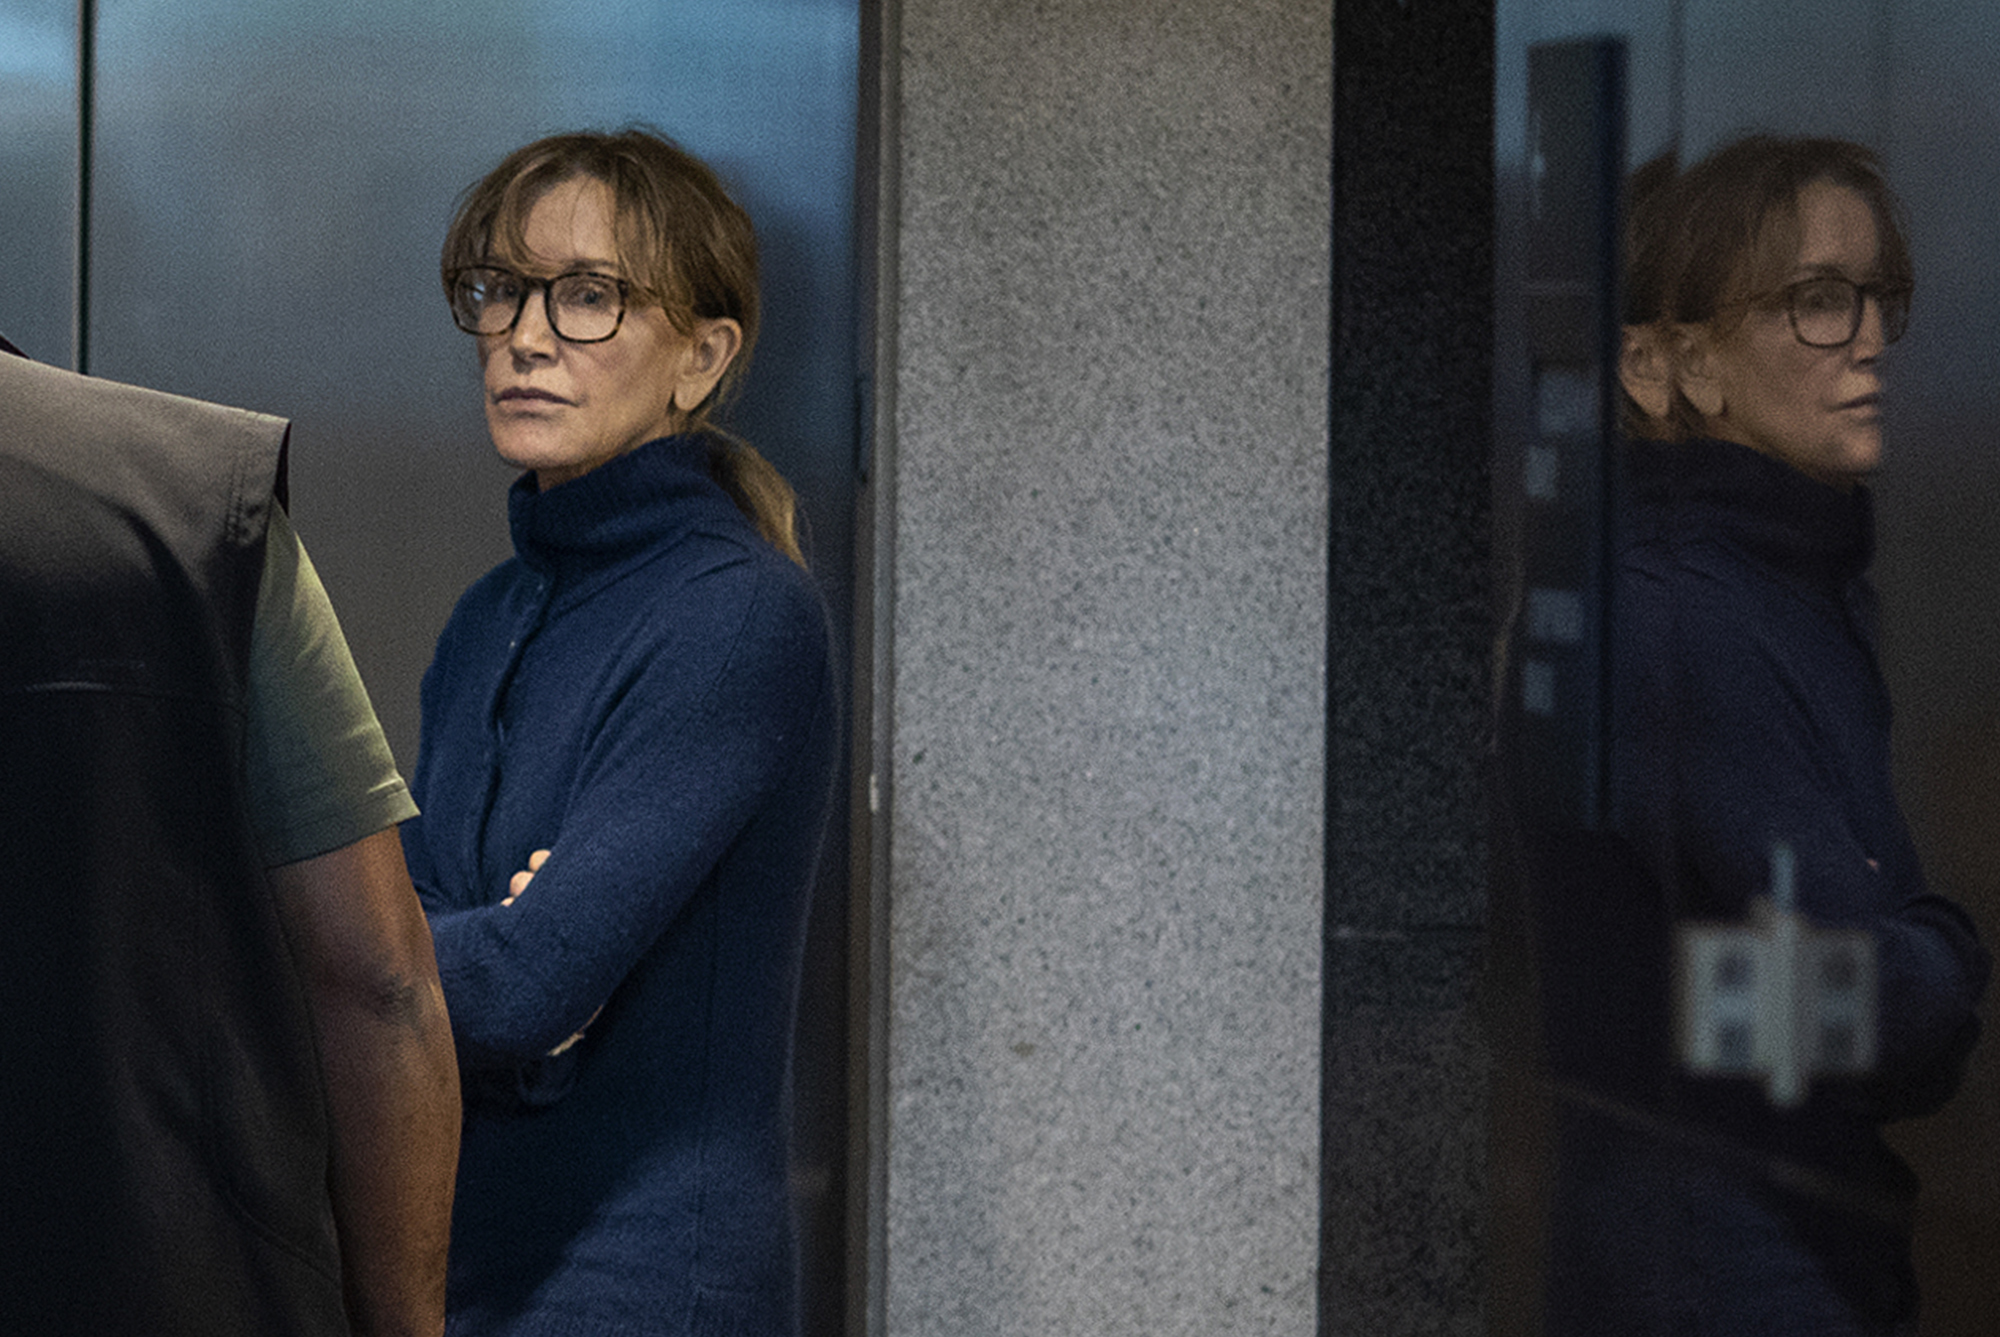 PHOTO: Actress Felicity Huffman is seen inside the Edward R. Roybal Federal Building and U.S. Courthouse in Los Angeles, March 12, 2019.